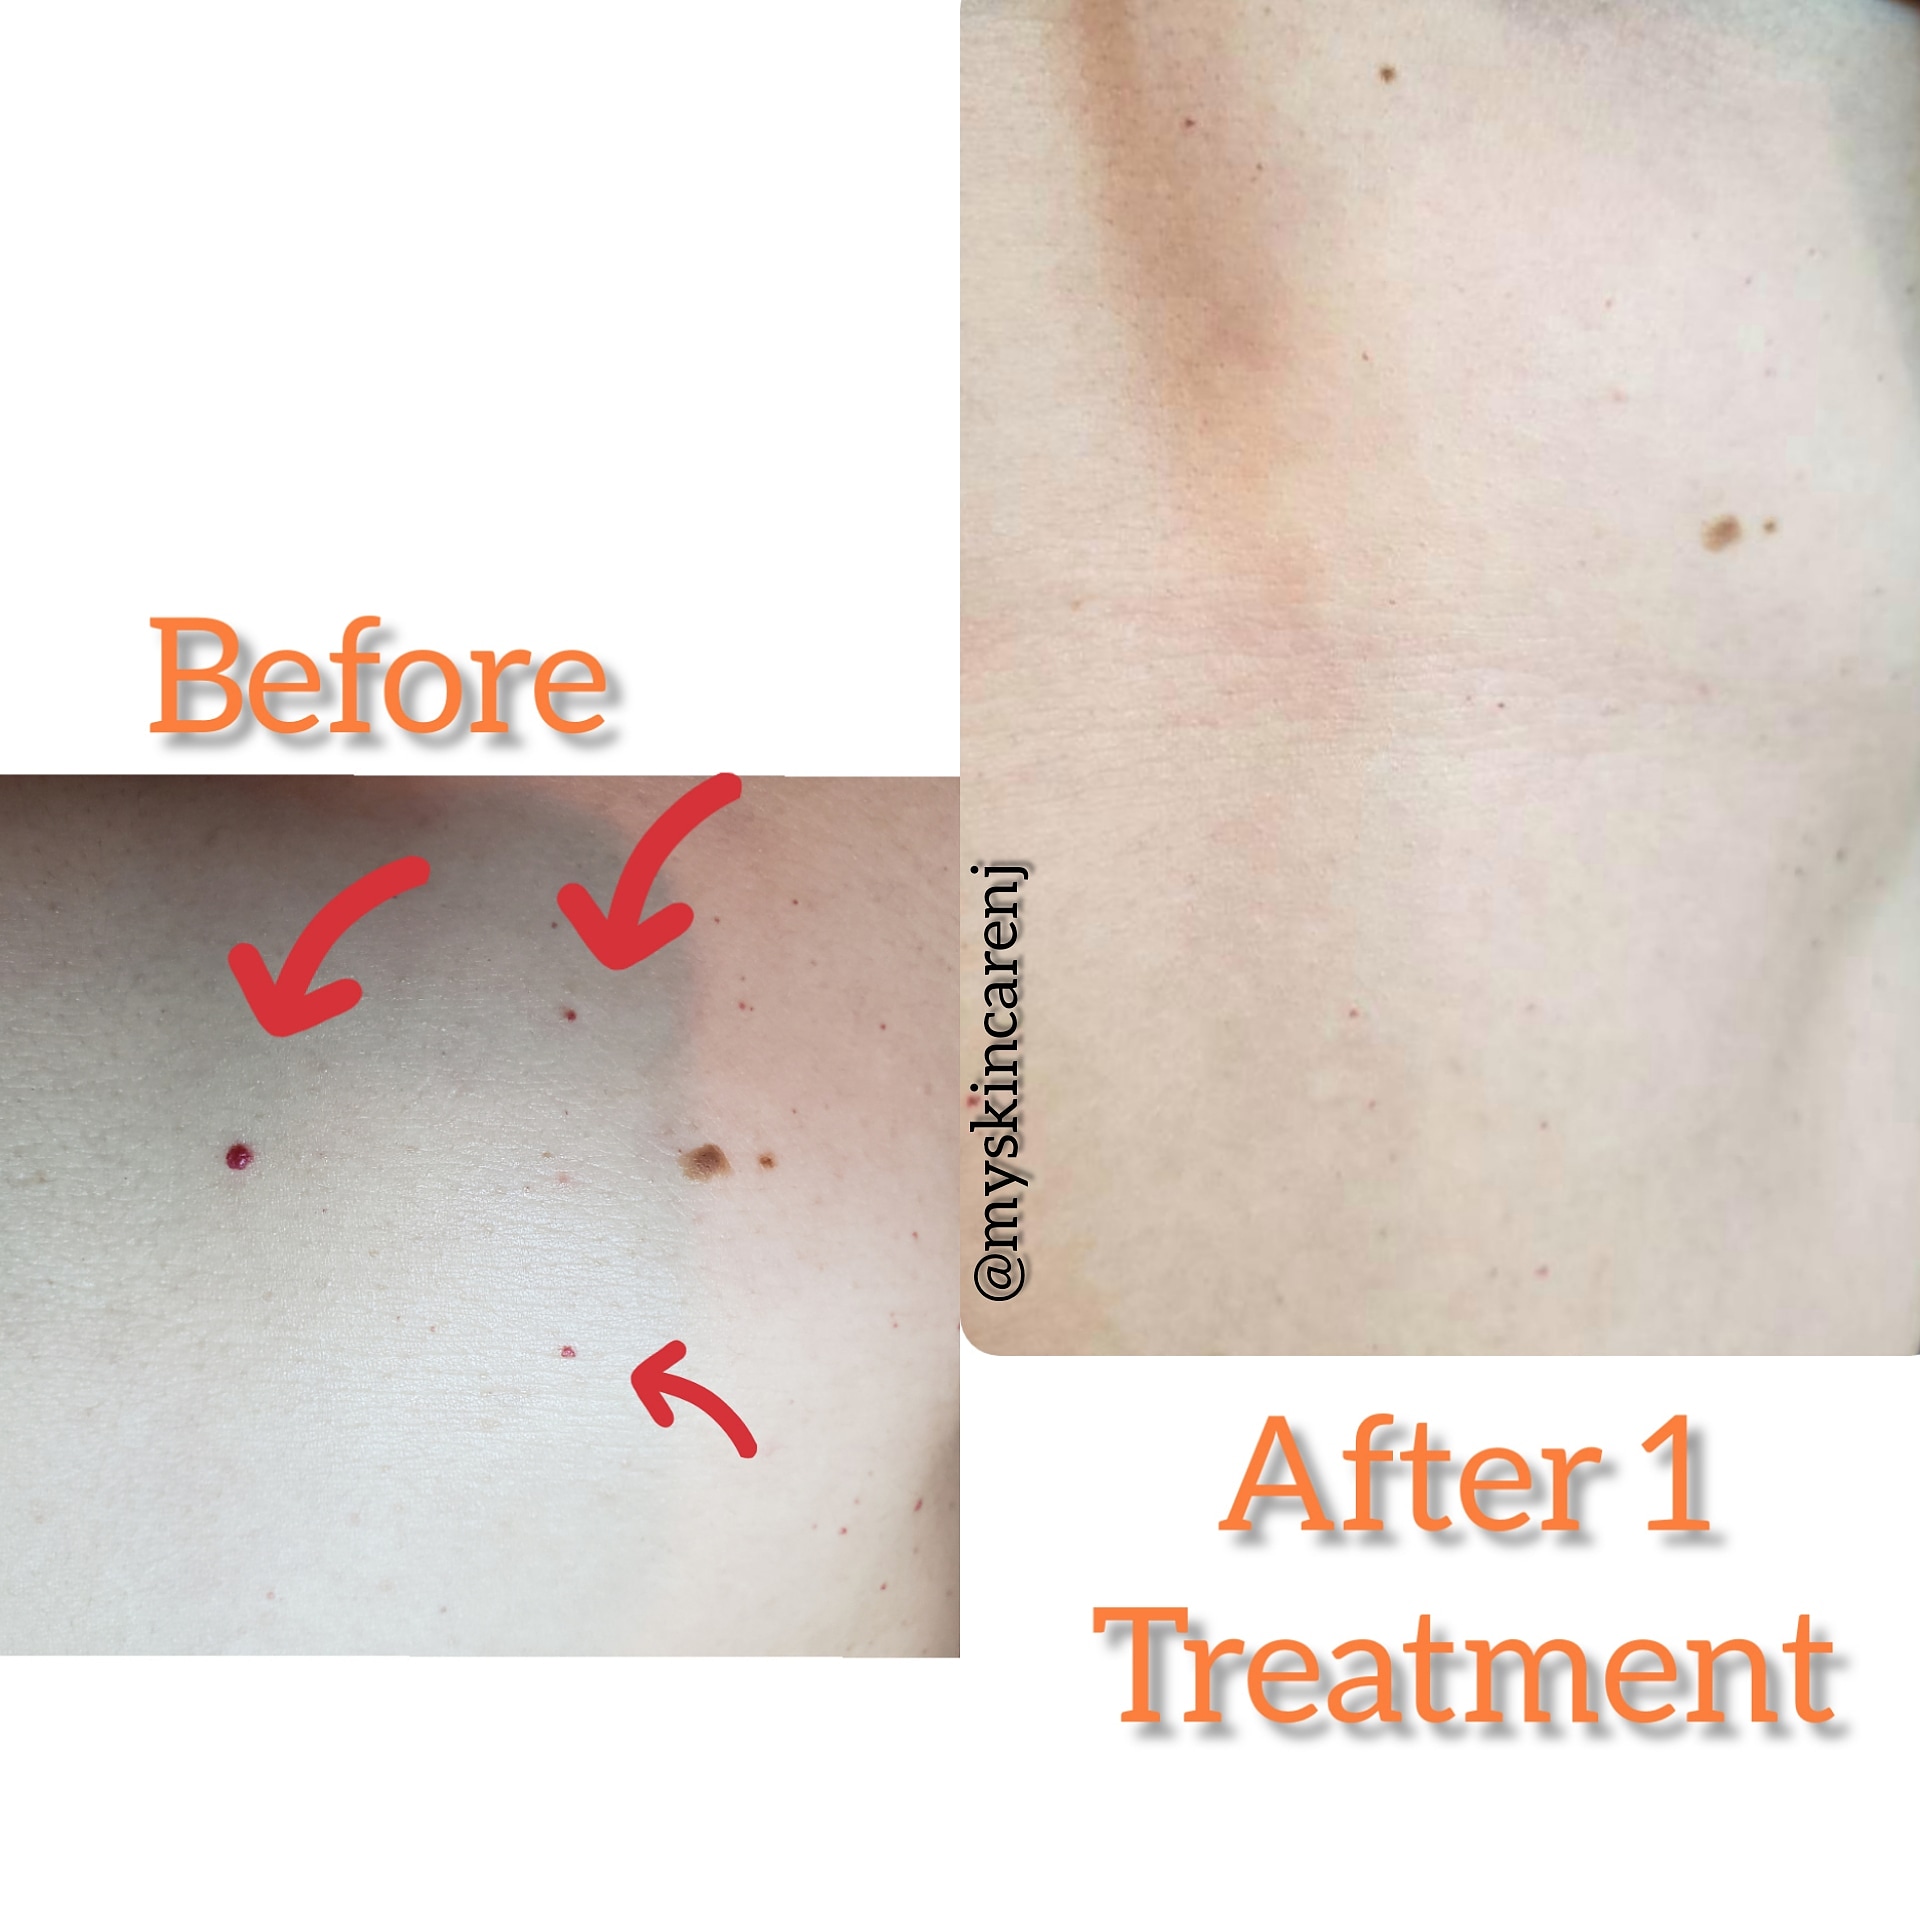 cherry angiomas before & after